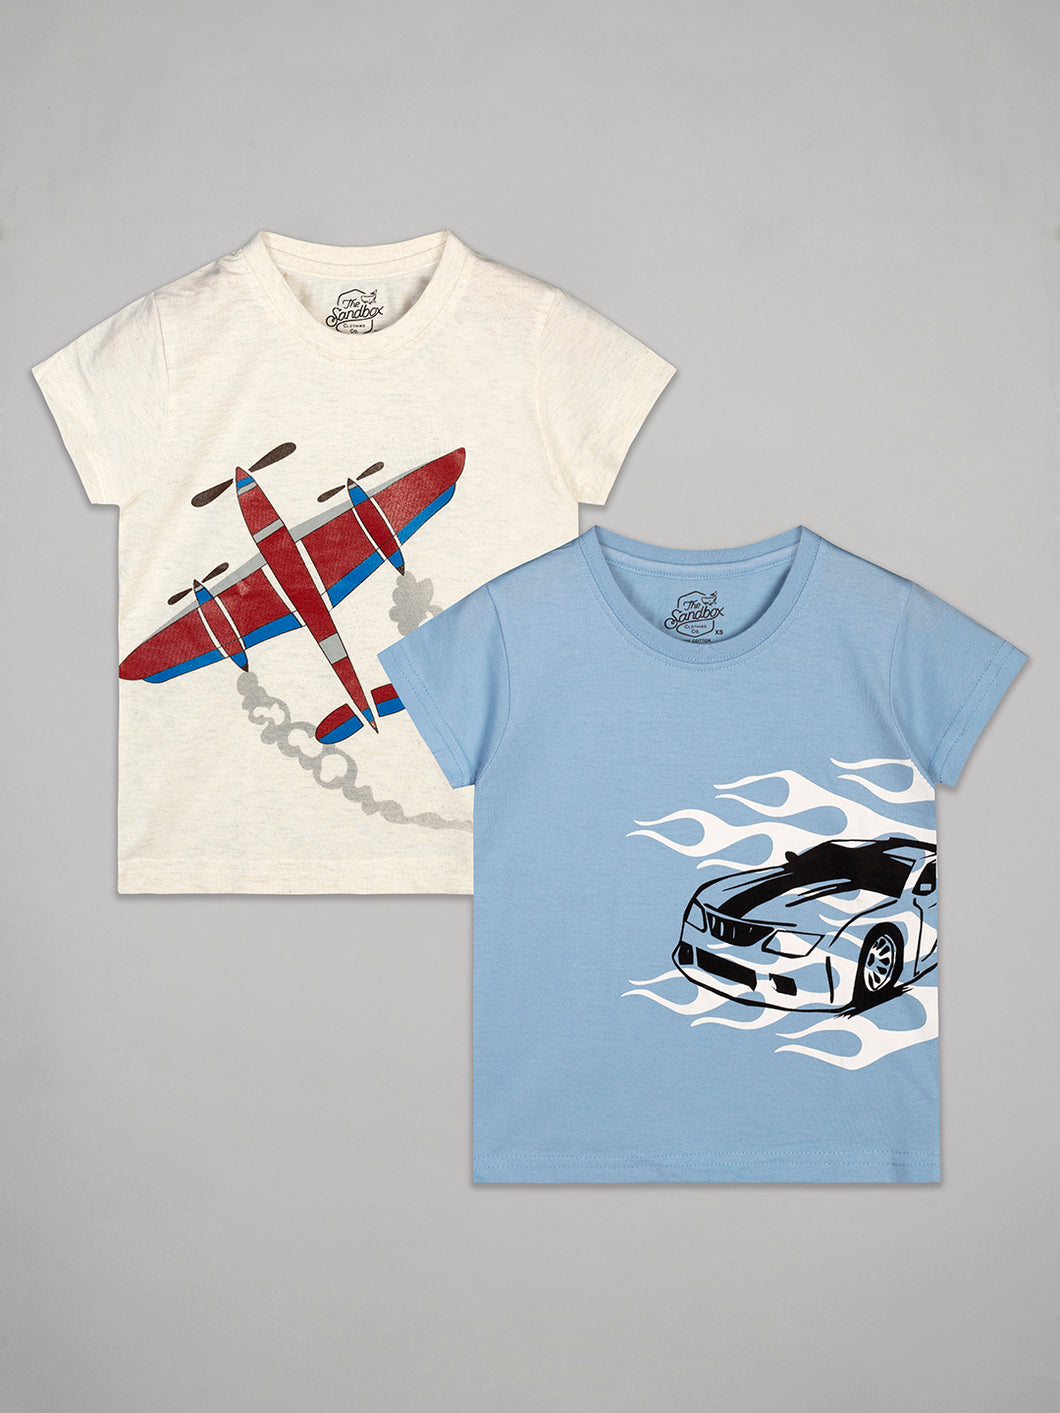 Beige round neck half sleeves tshirt with aeroplane printed on chest. Blue half sleeves boys tshirt with car printed on it